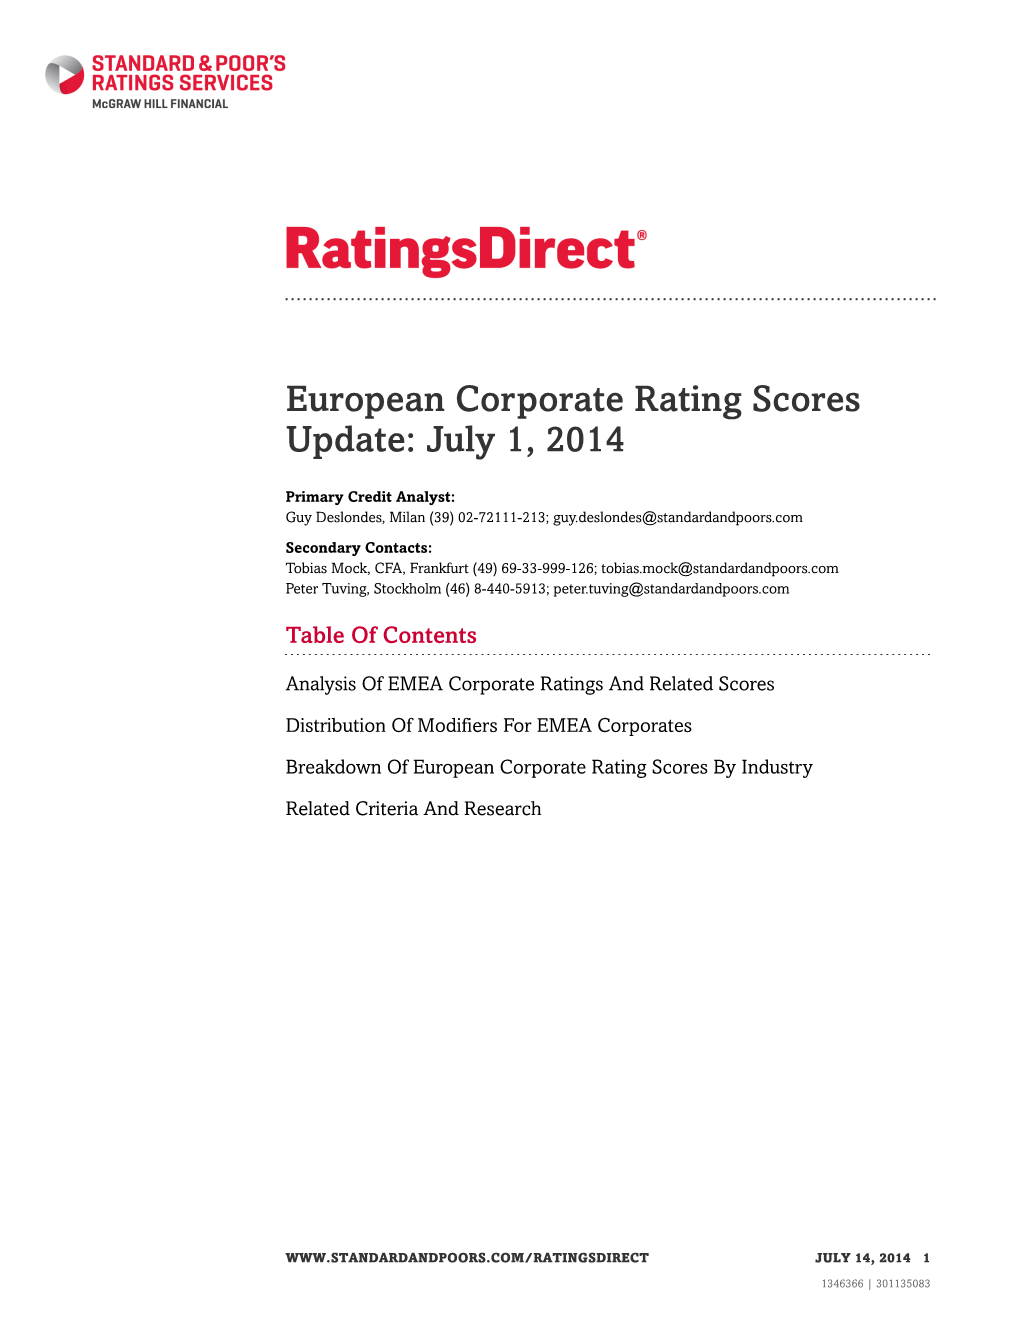 European Corporate Rating Scores Update: July 1, 2014